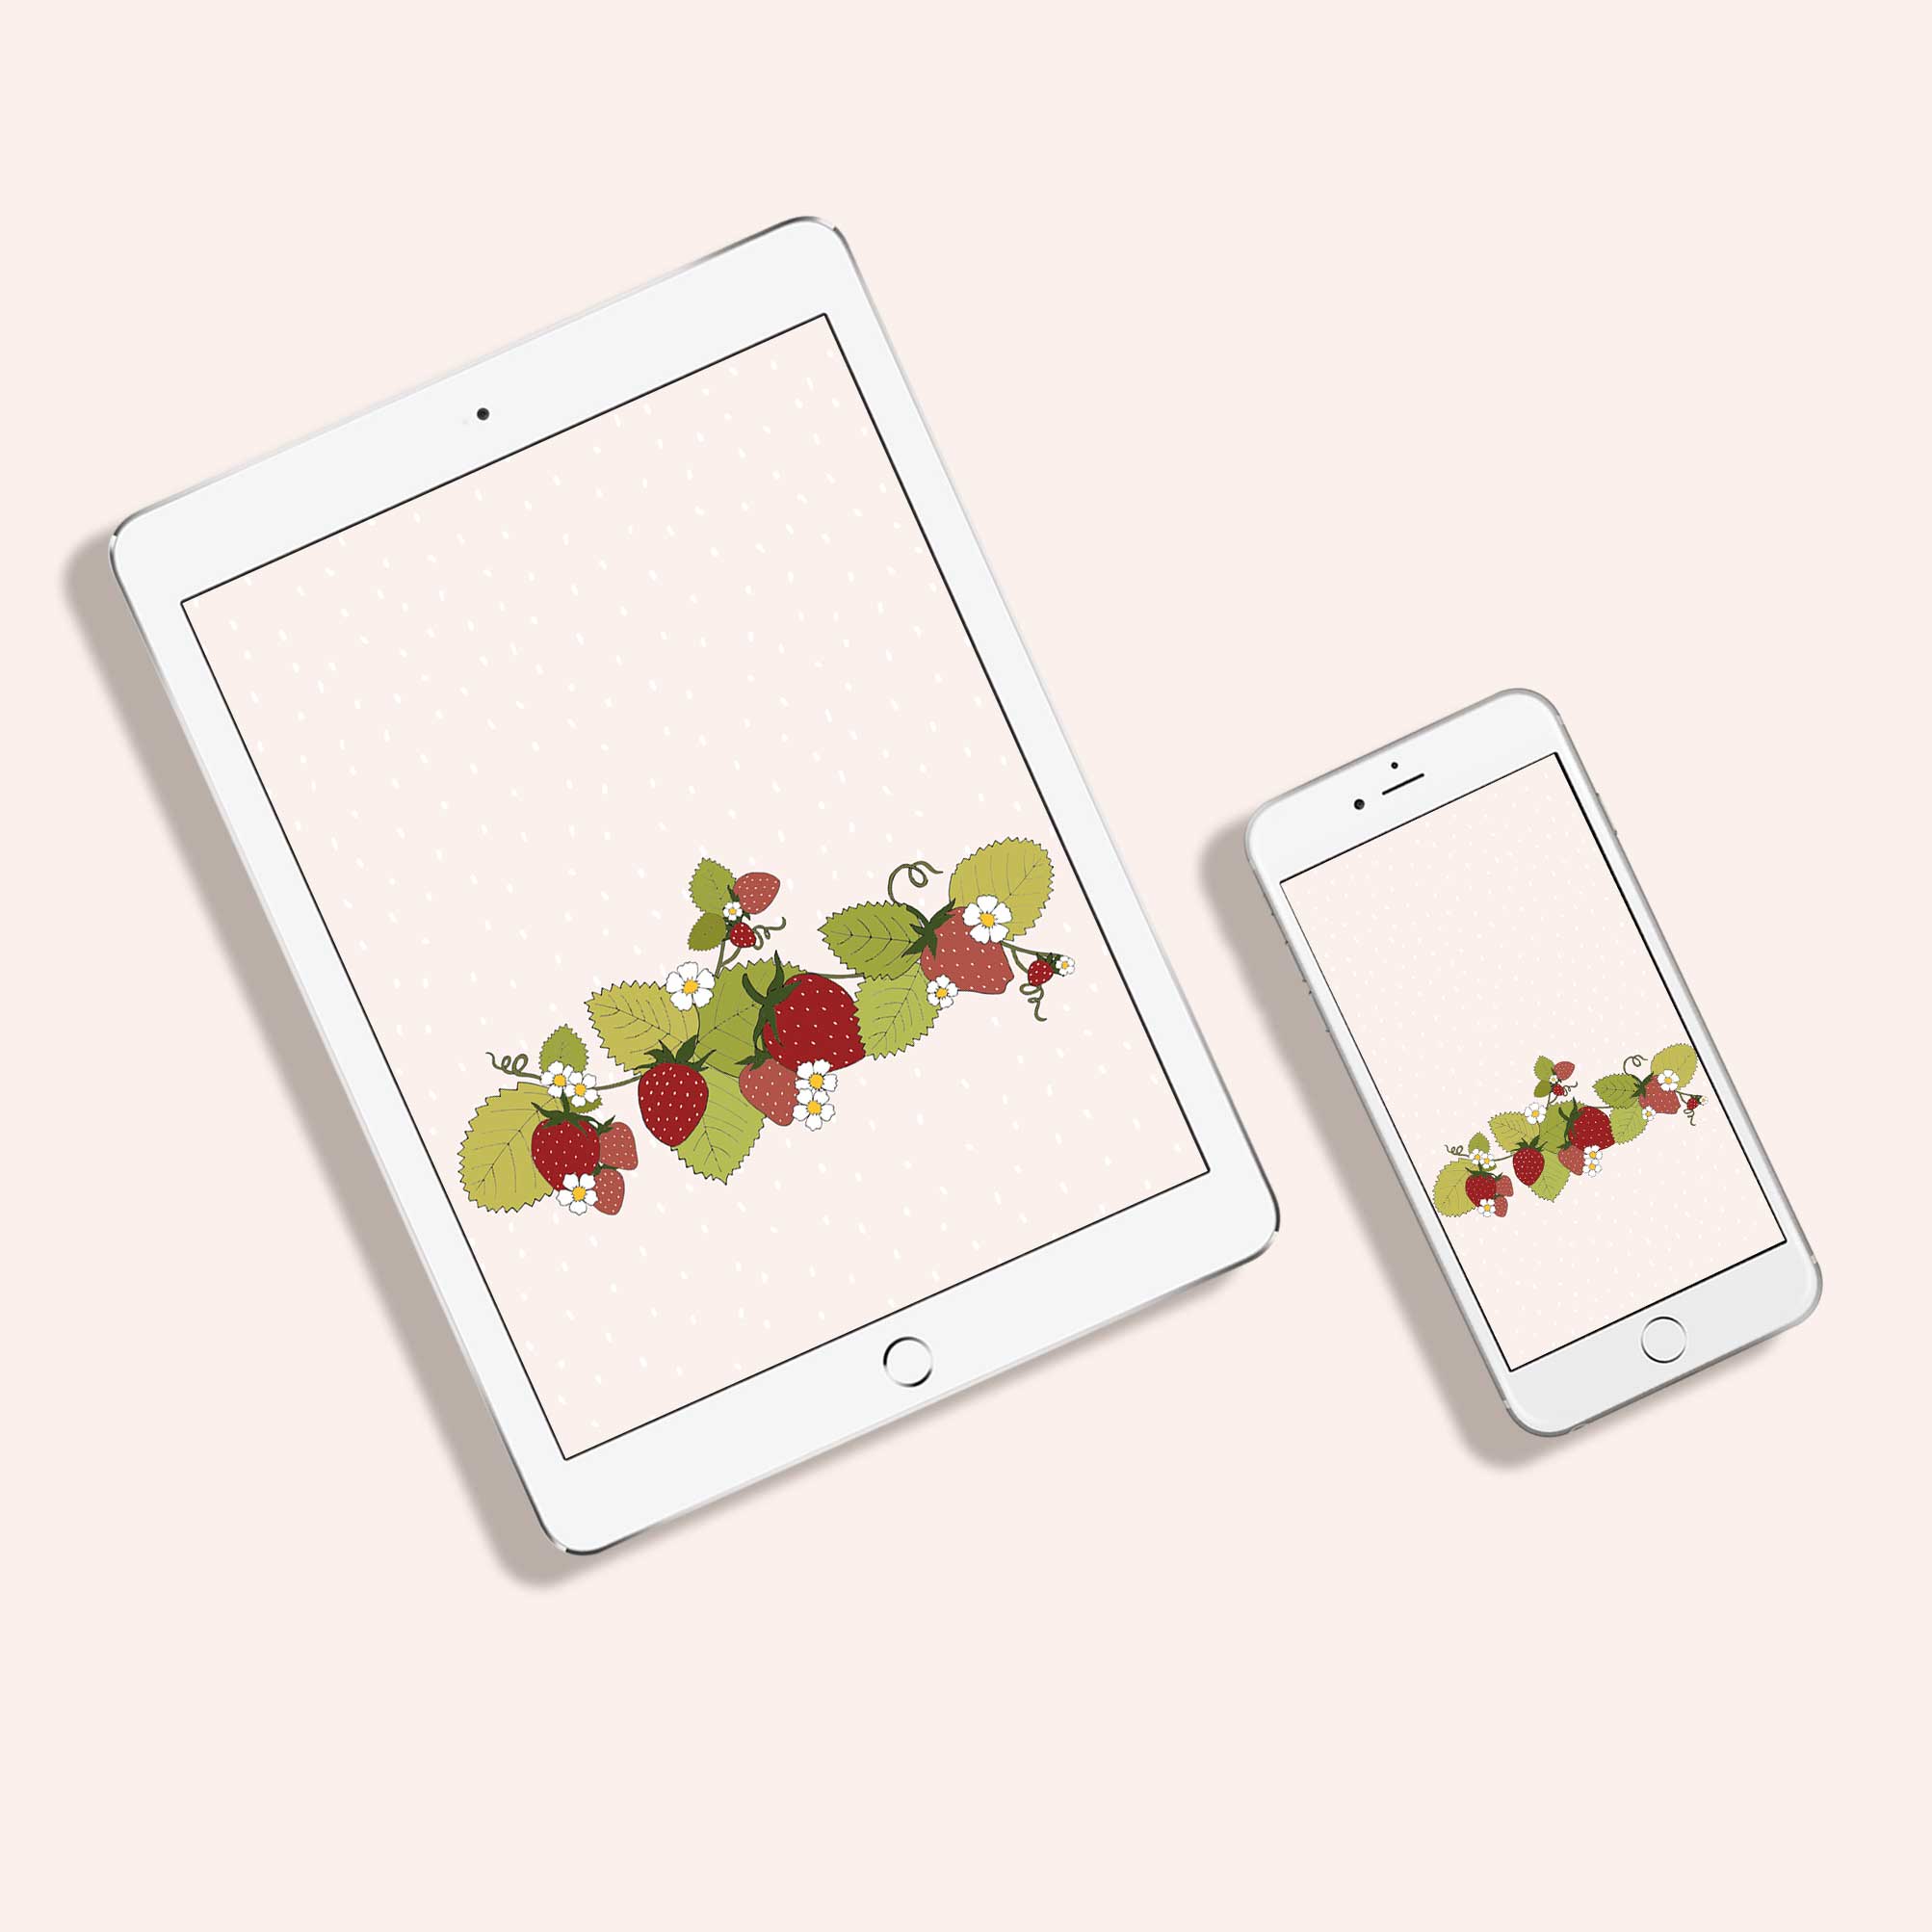 Strawberry patch wallpaper - free download for desktop, iPad and iPhone